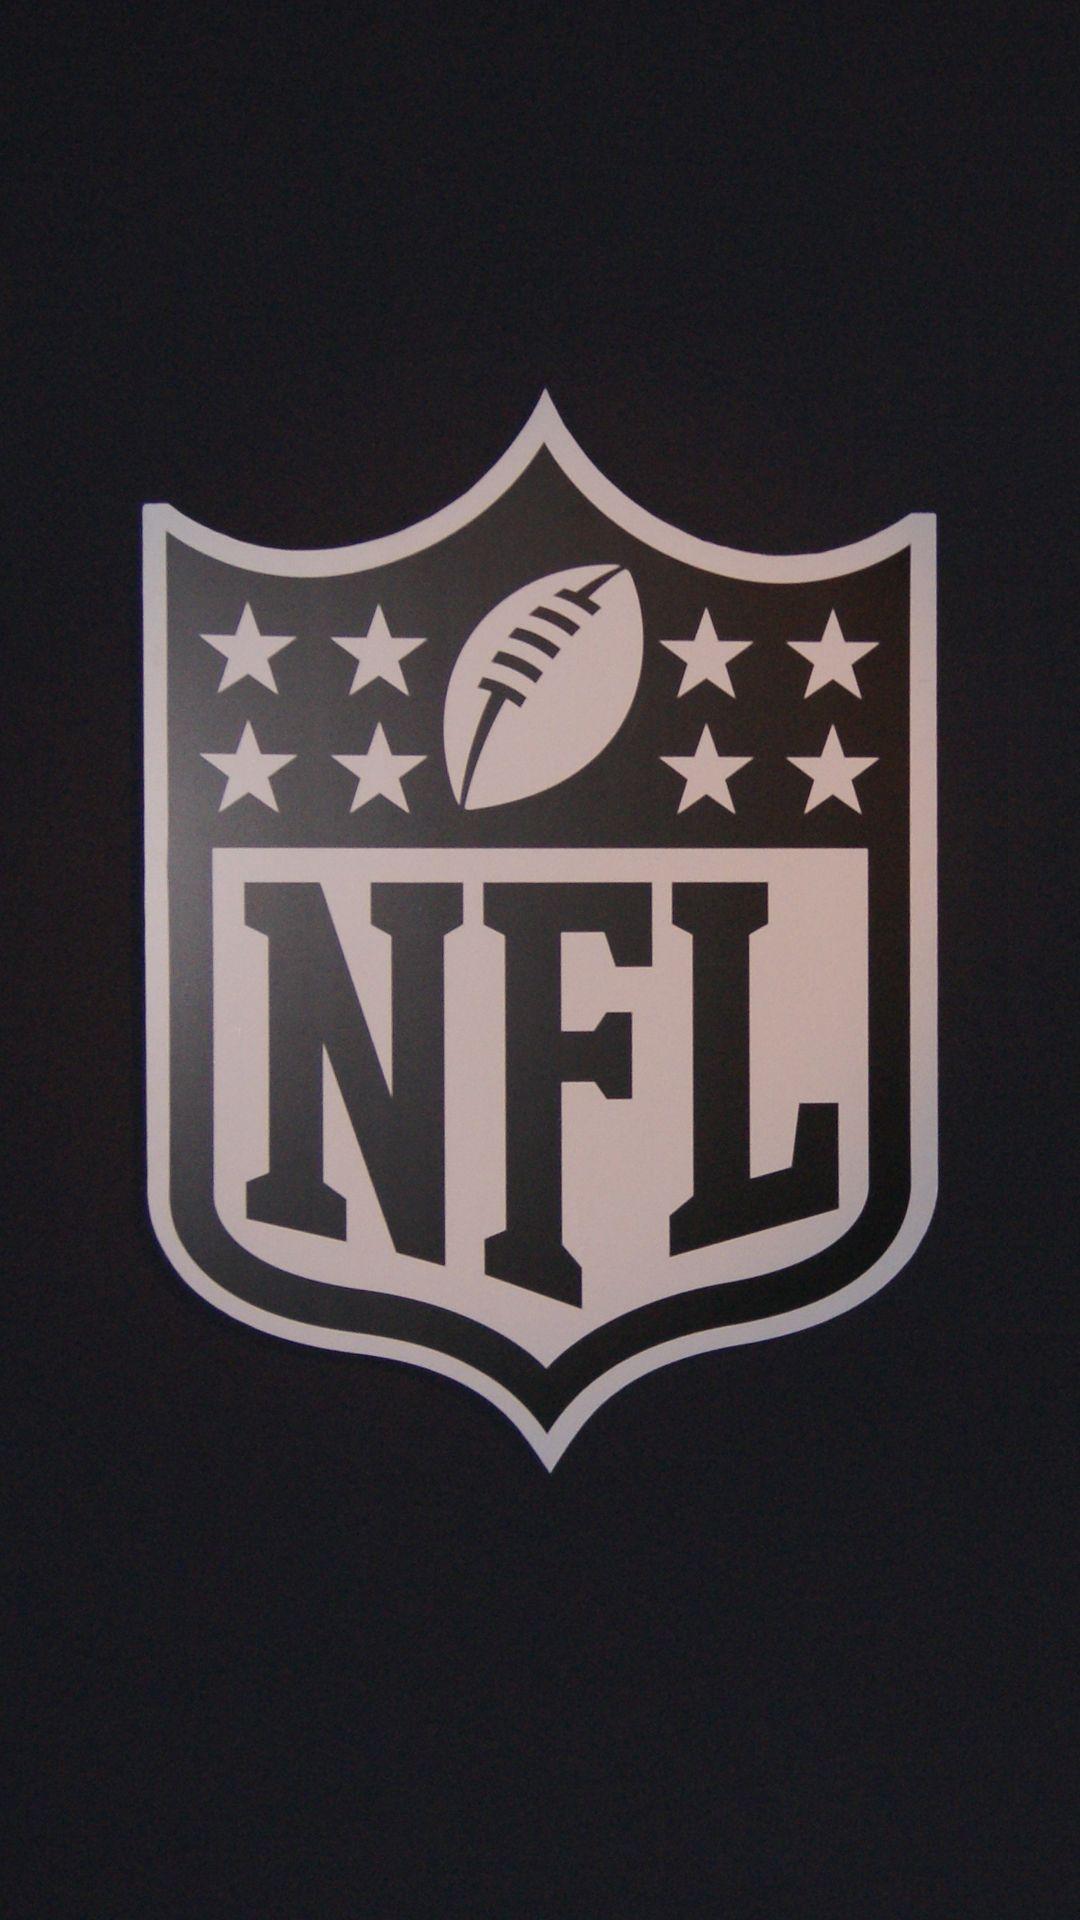 NFL htc one wallpaper, free and easy to download